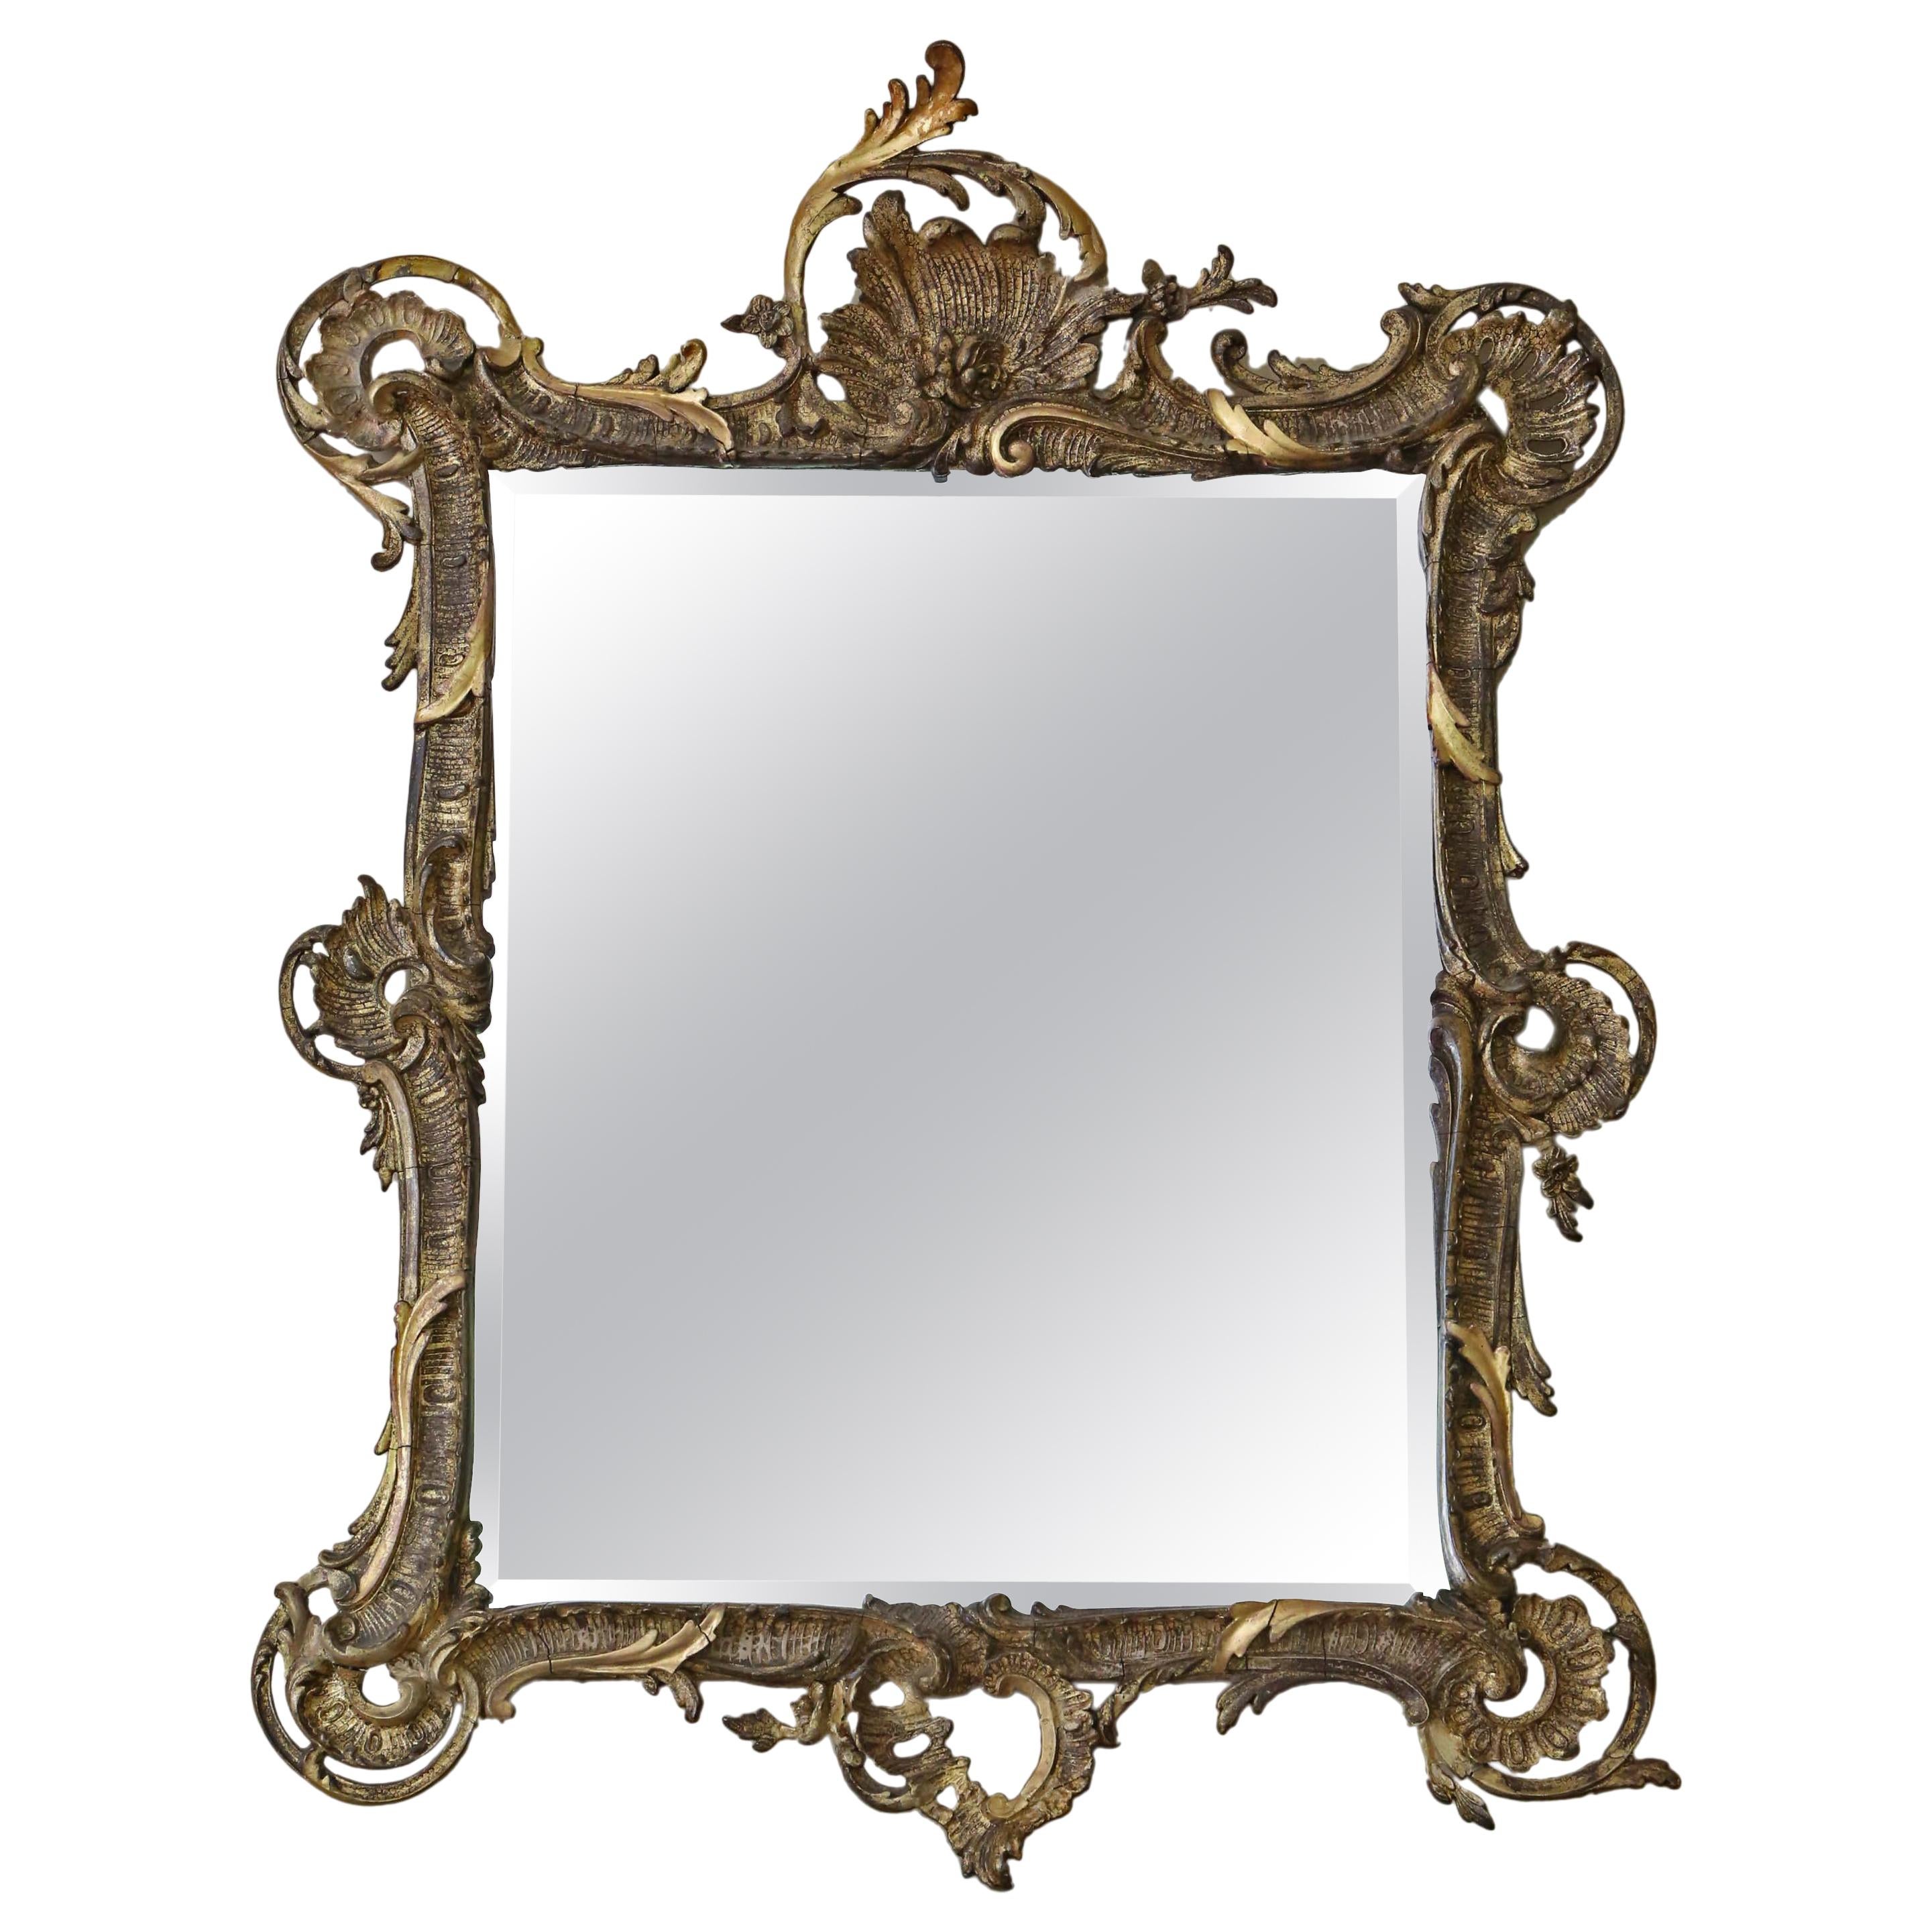 Antique Large Fine Quality Early 19th Century Gilt Overmantel or Wall Mirror For Sale